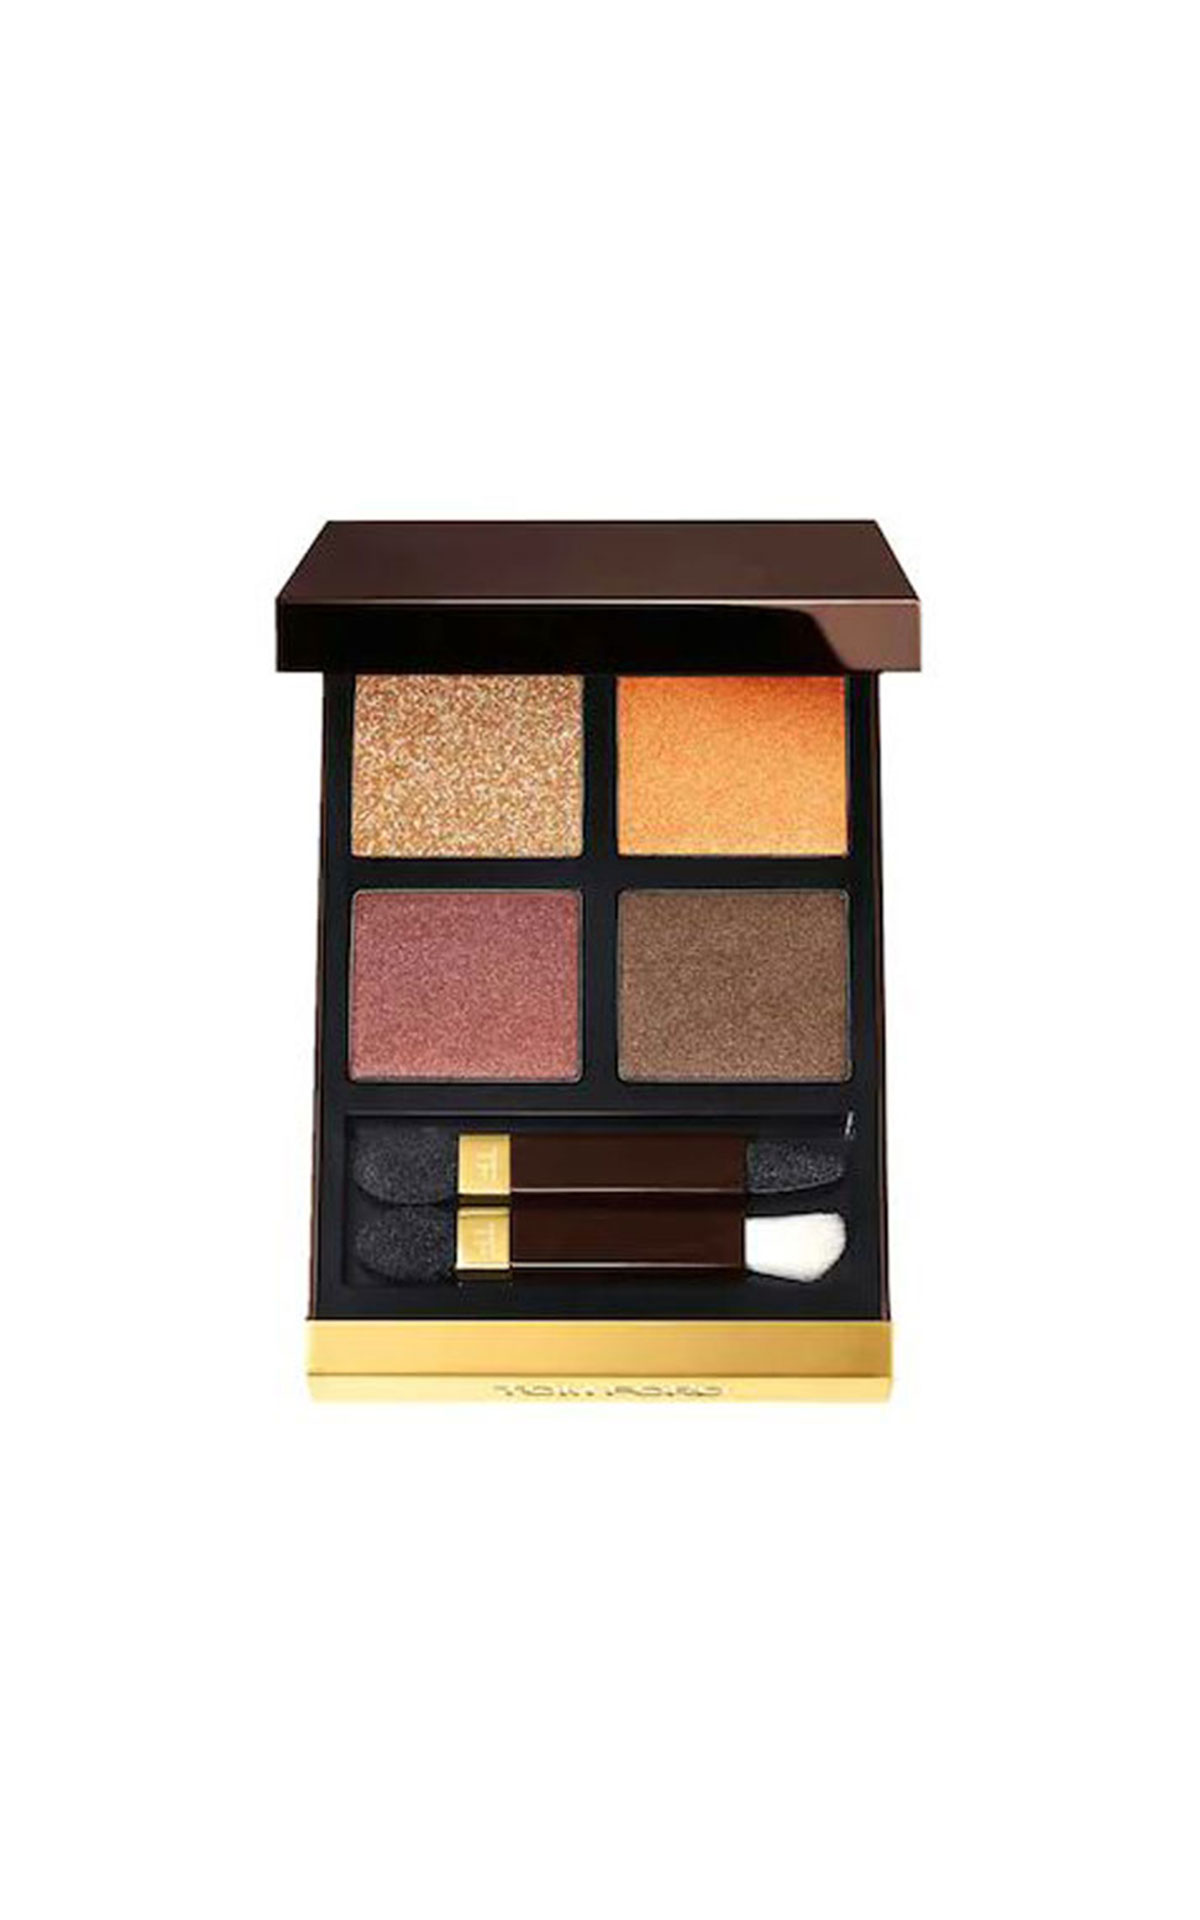 The Cosmetics Company Store Tom Ford eye colour quad shade 26 Leopard sun from Bicester Village